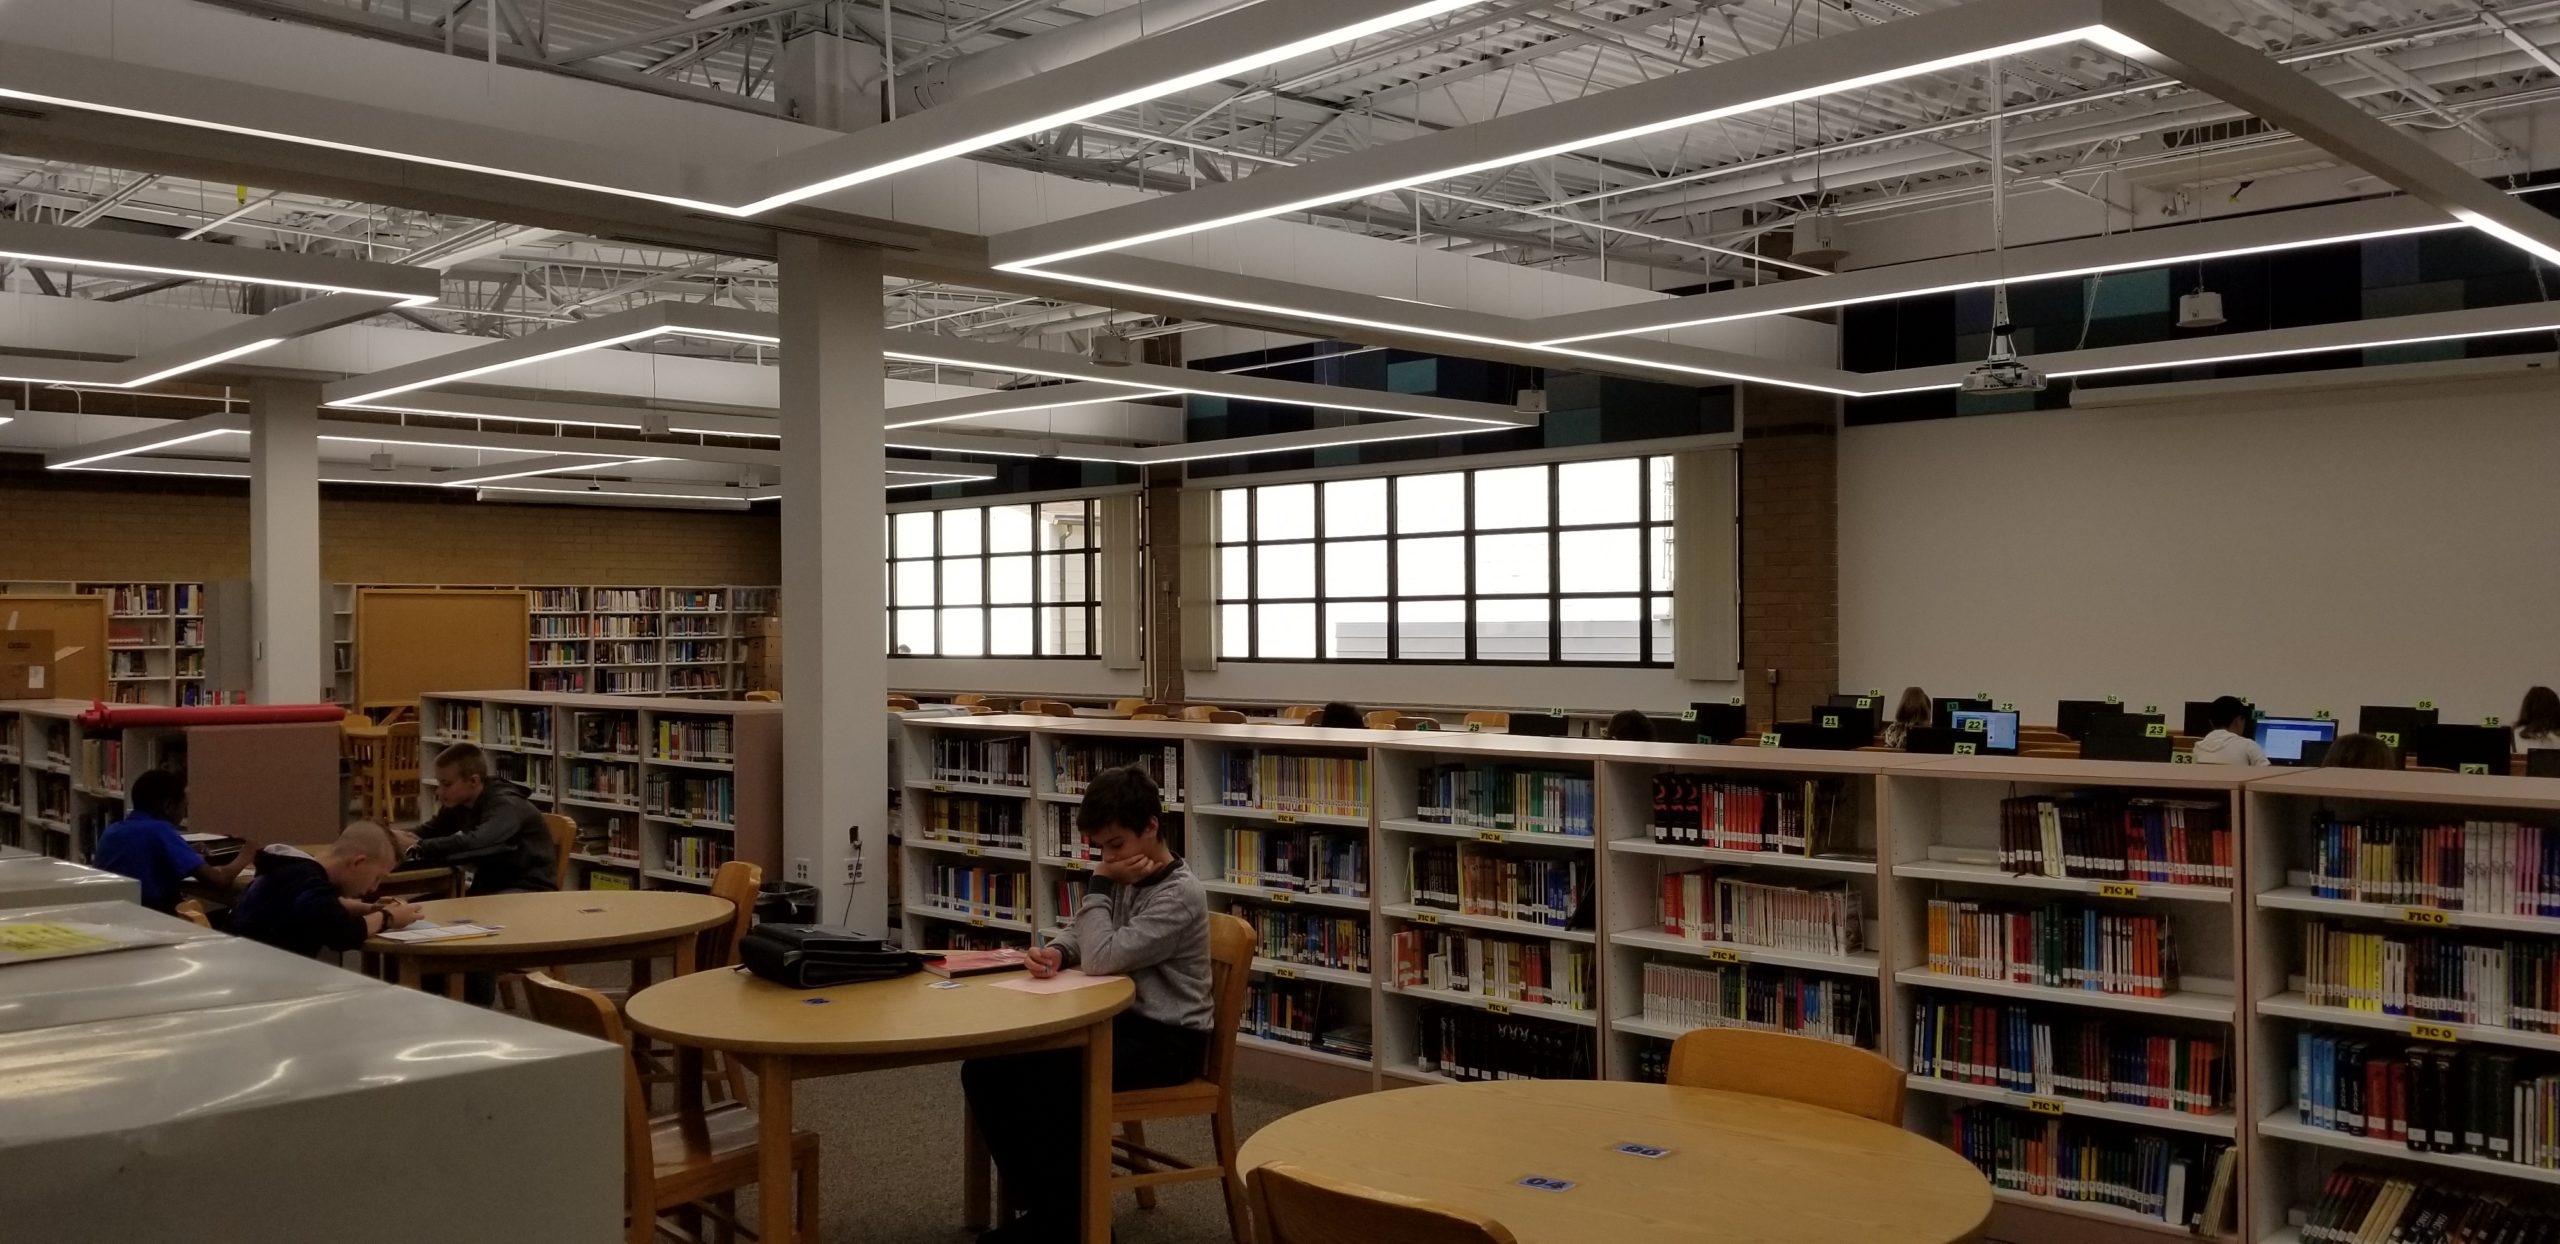 A view of the inside of the Library Media Center.